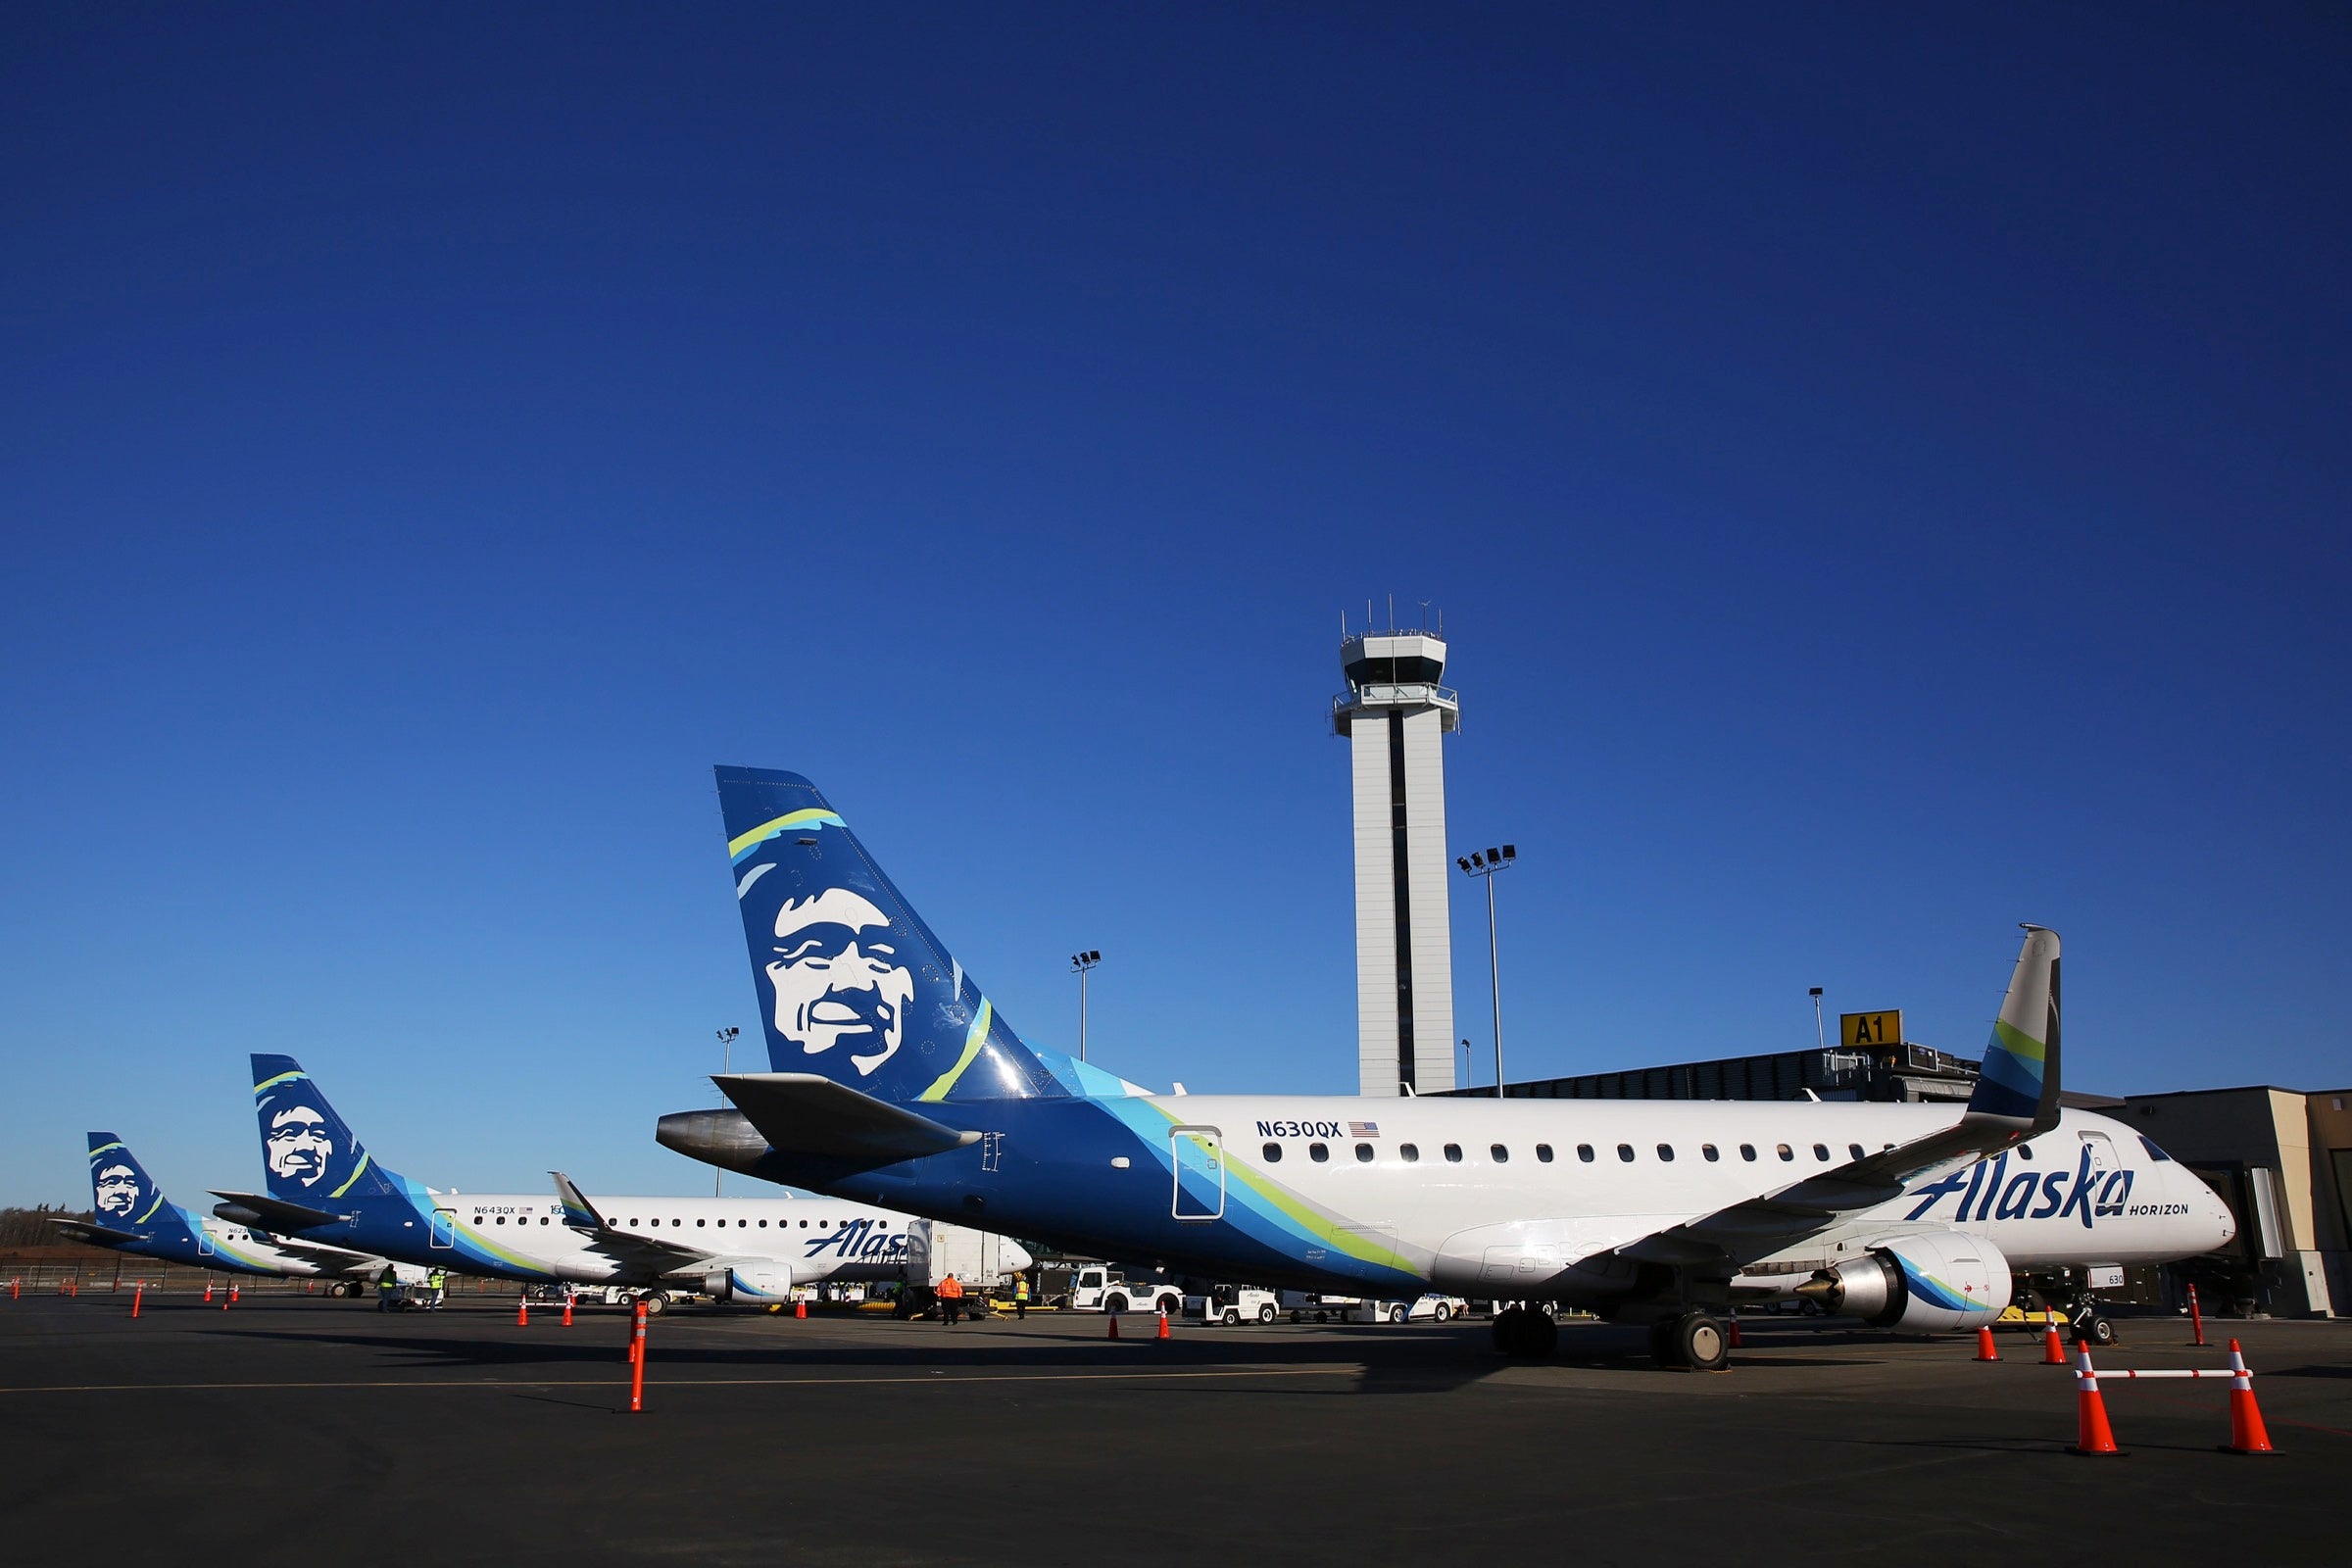 Alaska Airlines jets at the gate in Everett Pane Field airport